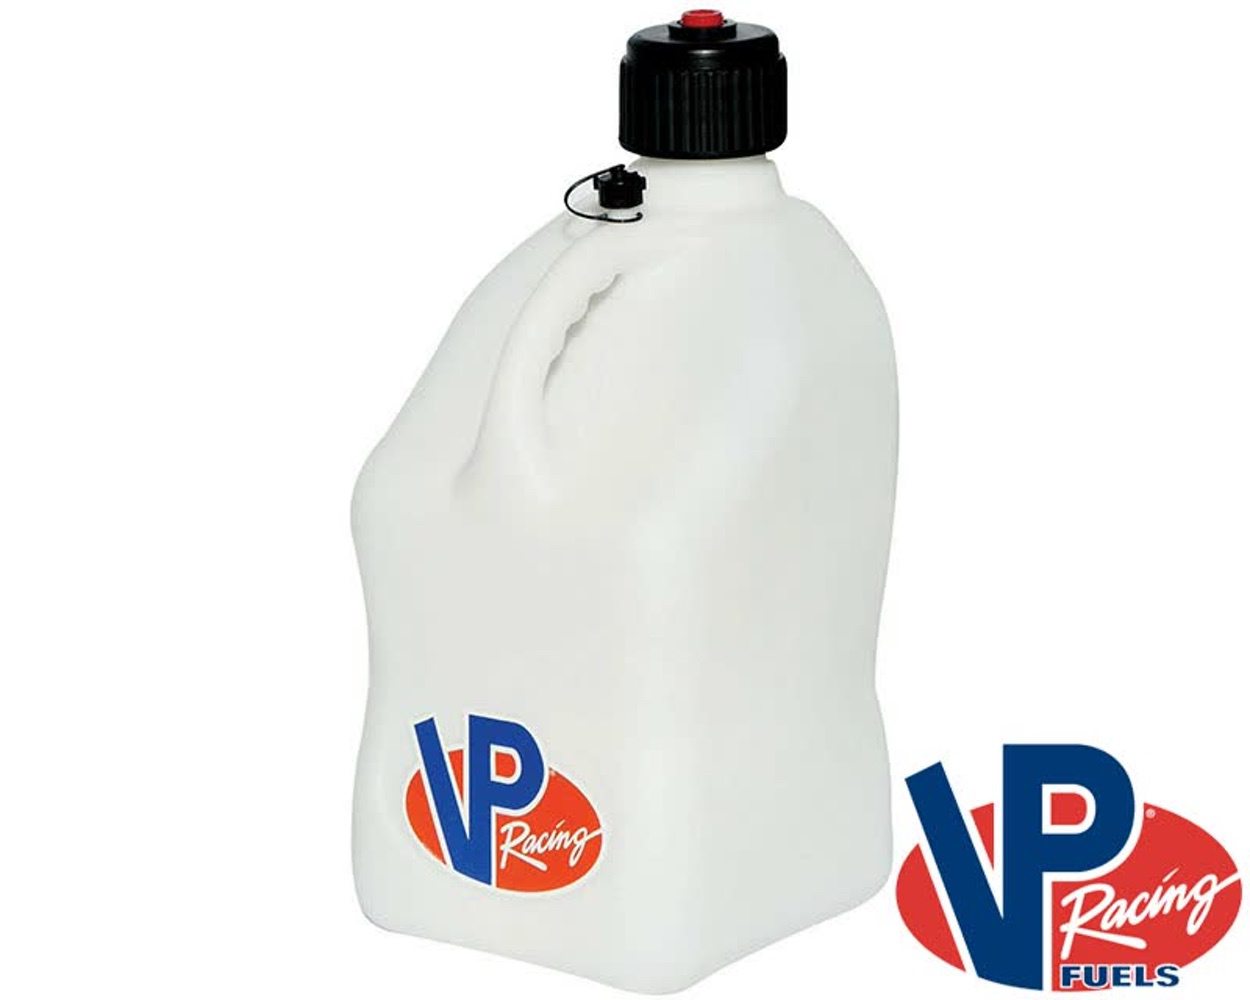 Vp Racing Fuel Container 20L White